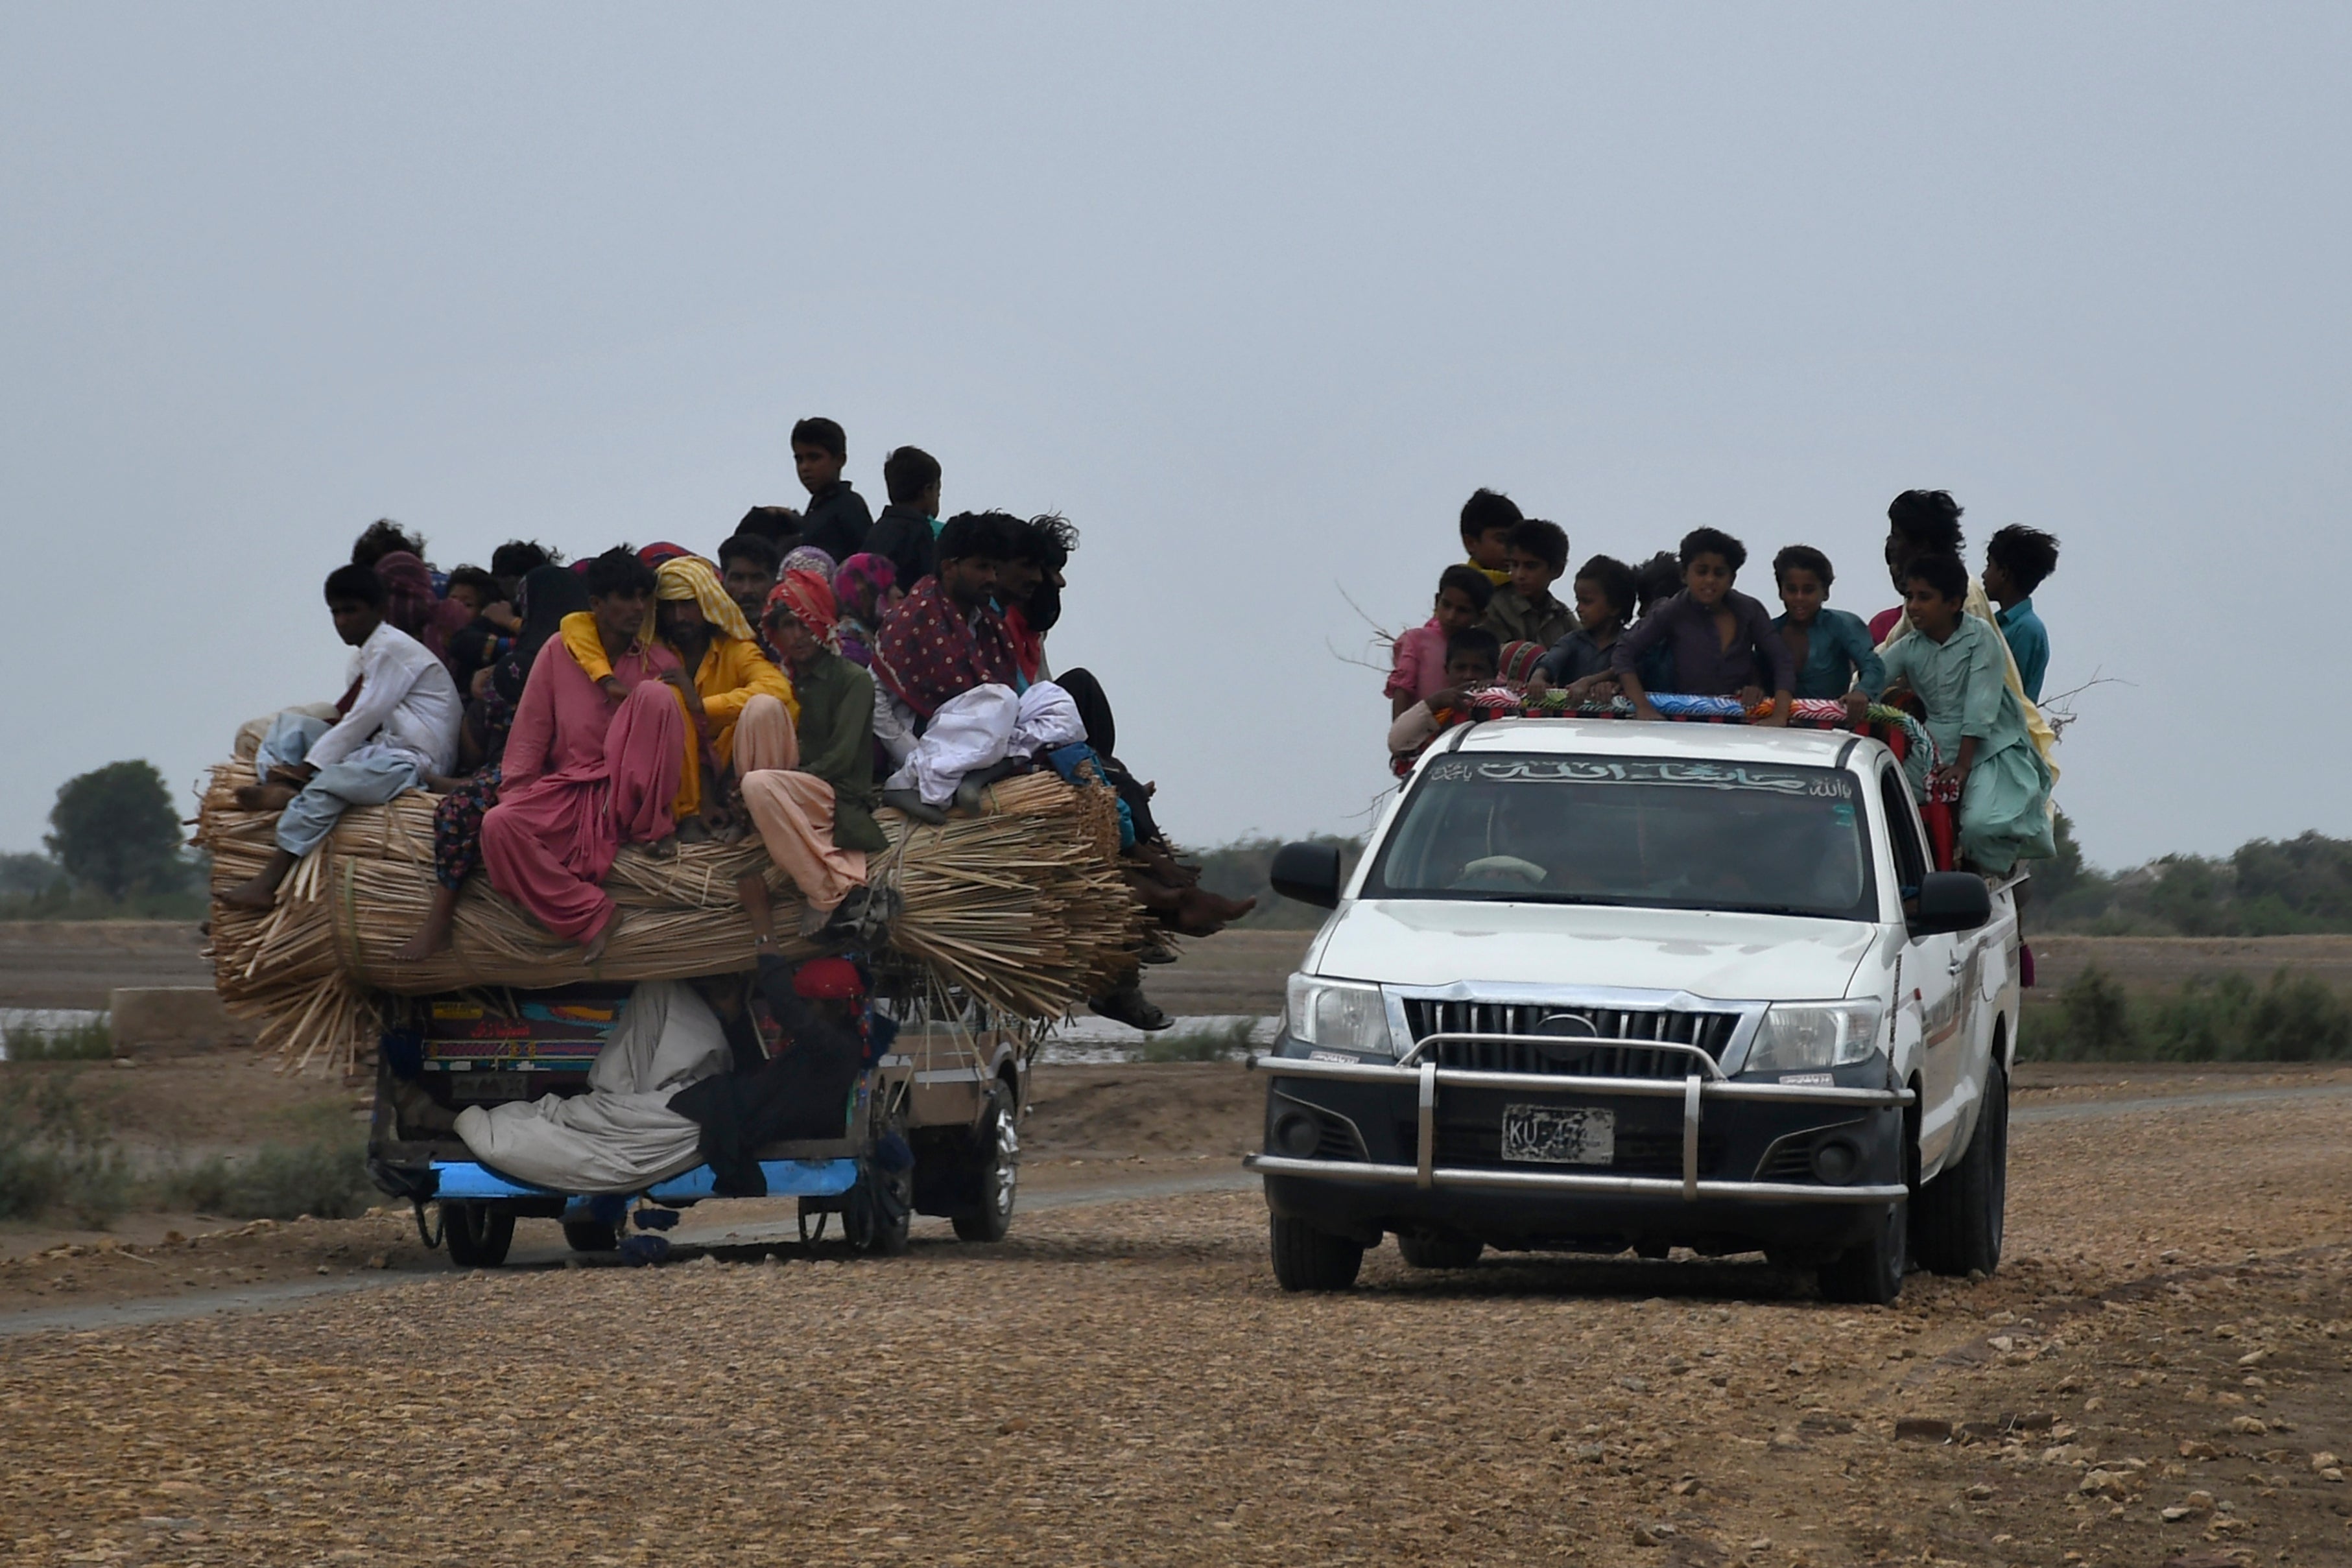 Local residents travel on a vehicle as they flee from a coastal village due to Cyclone Biparjoy approaching, in Golarchi near Badin, Pakistan's southern district in the Sindh province